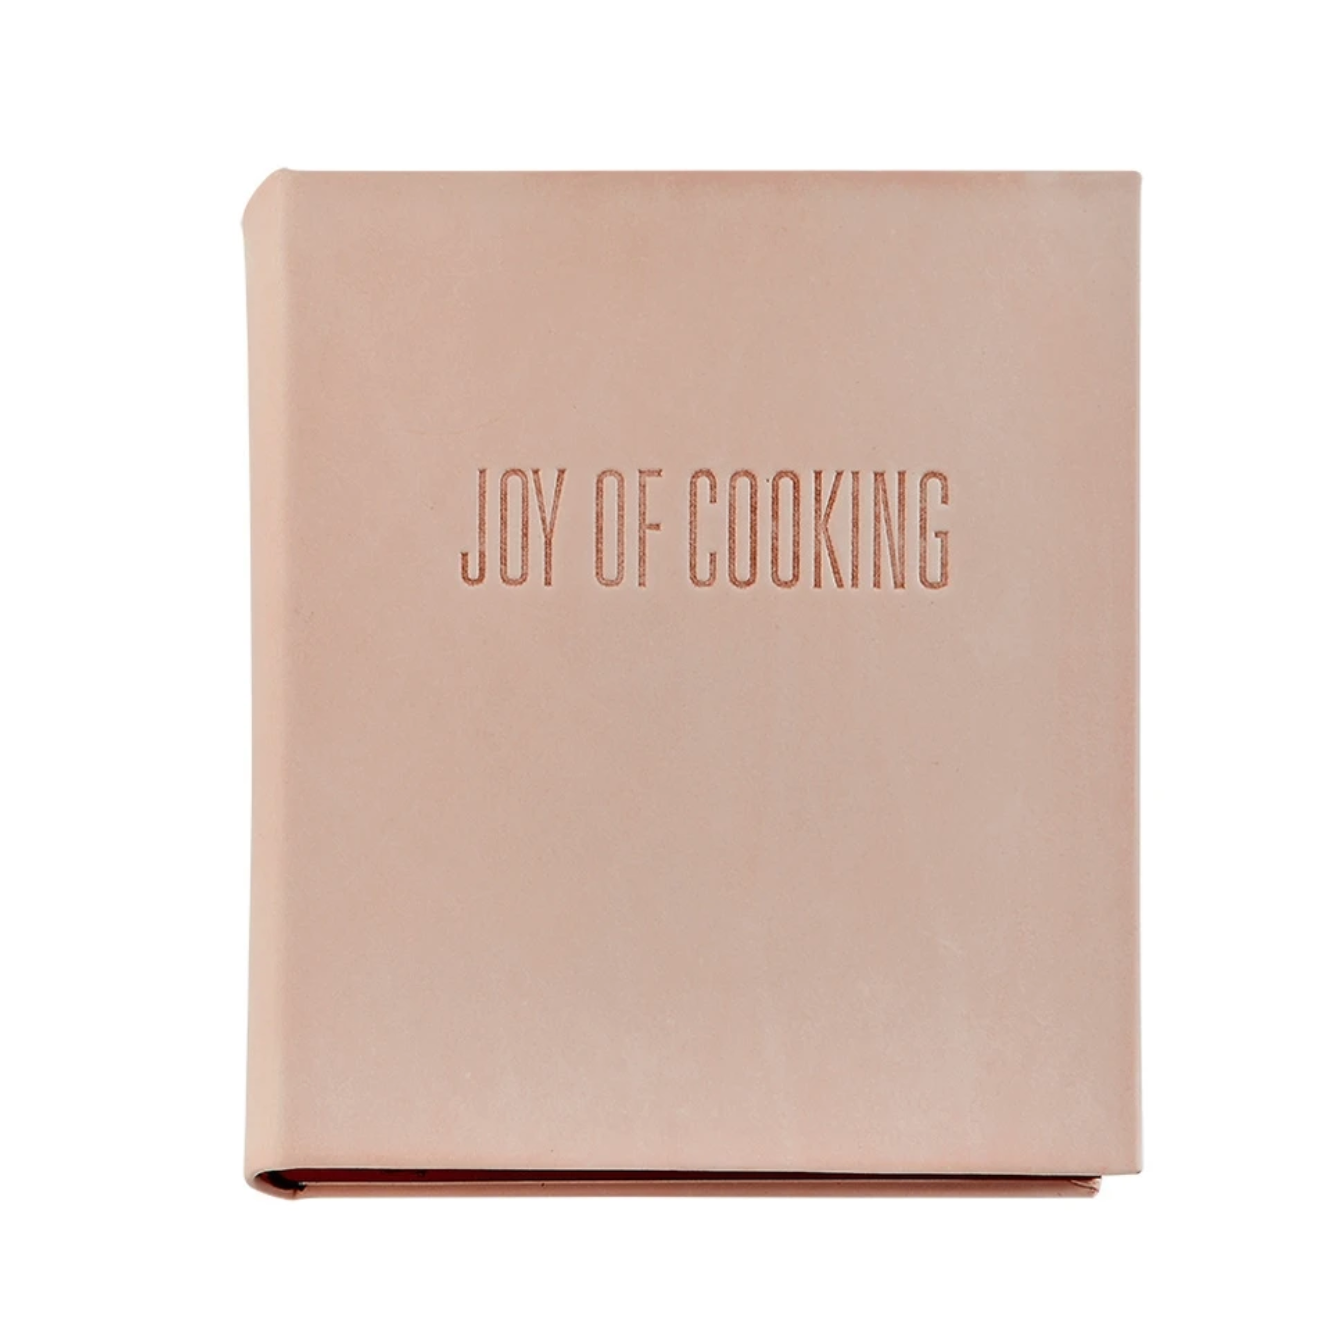 Leather Bound Joy Of Cooking Book